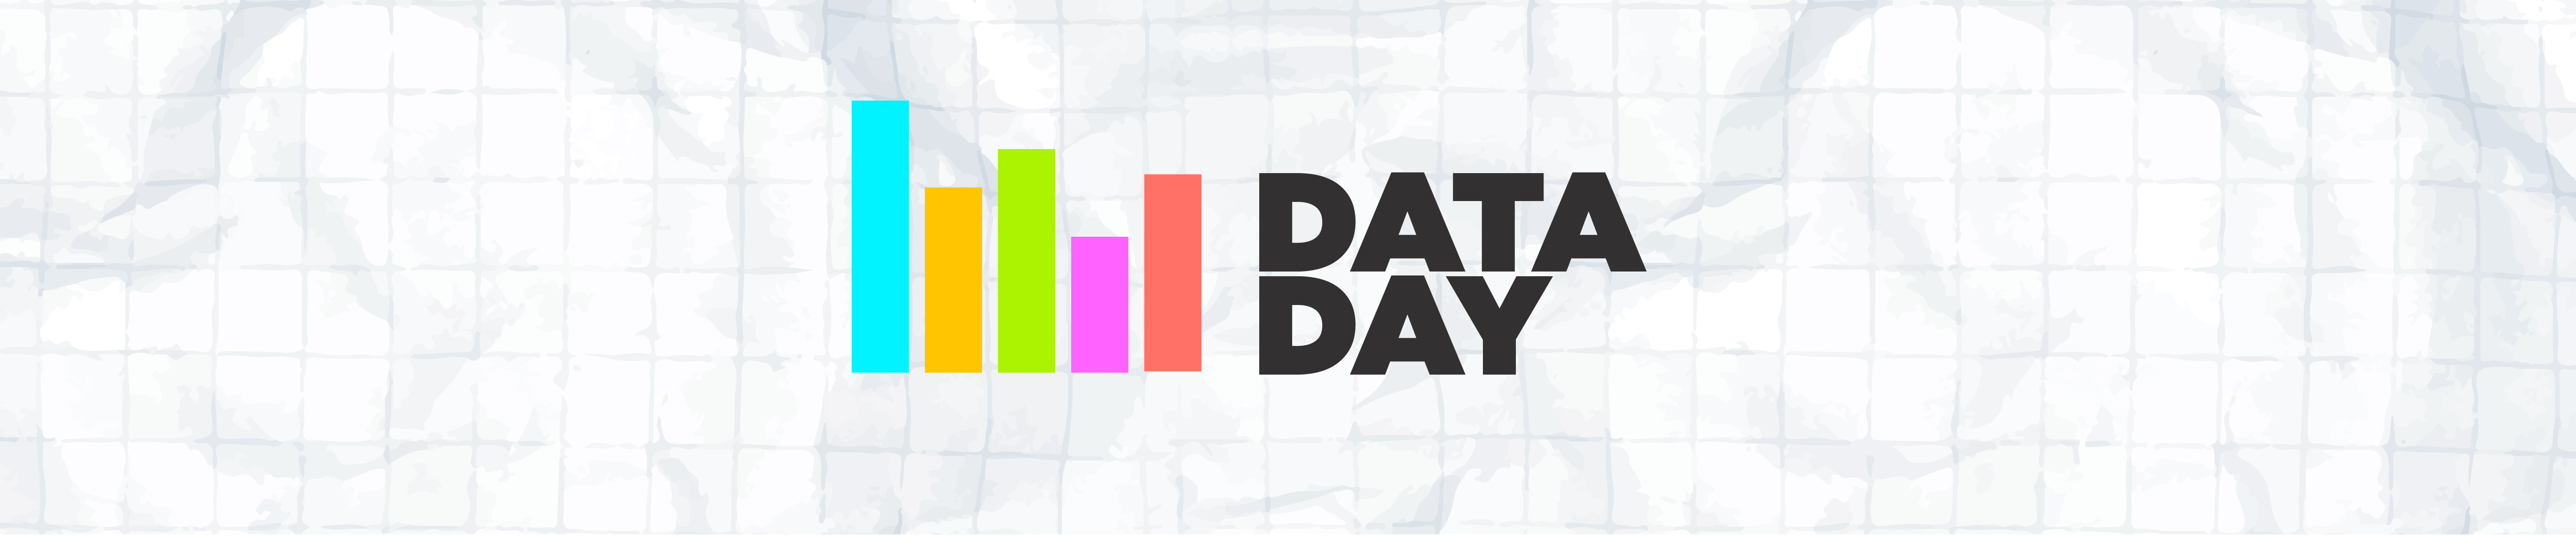 generic bar graph with day day text overlay.